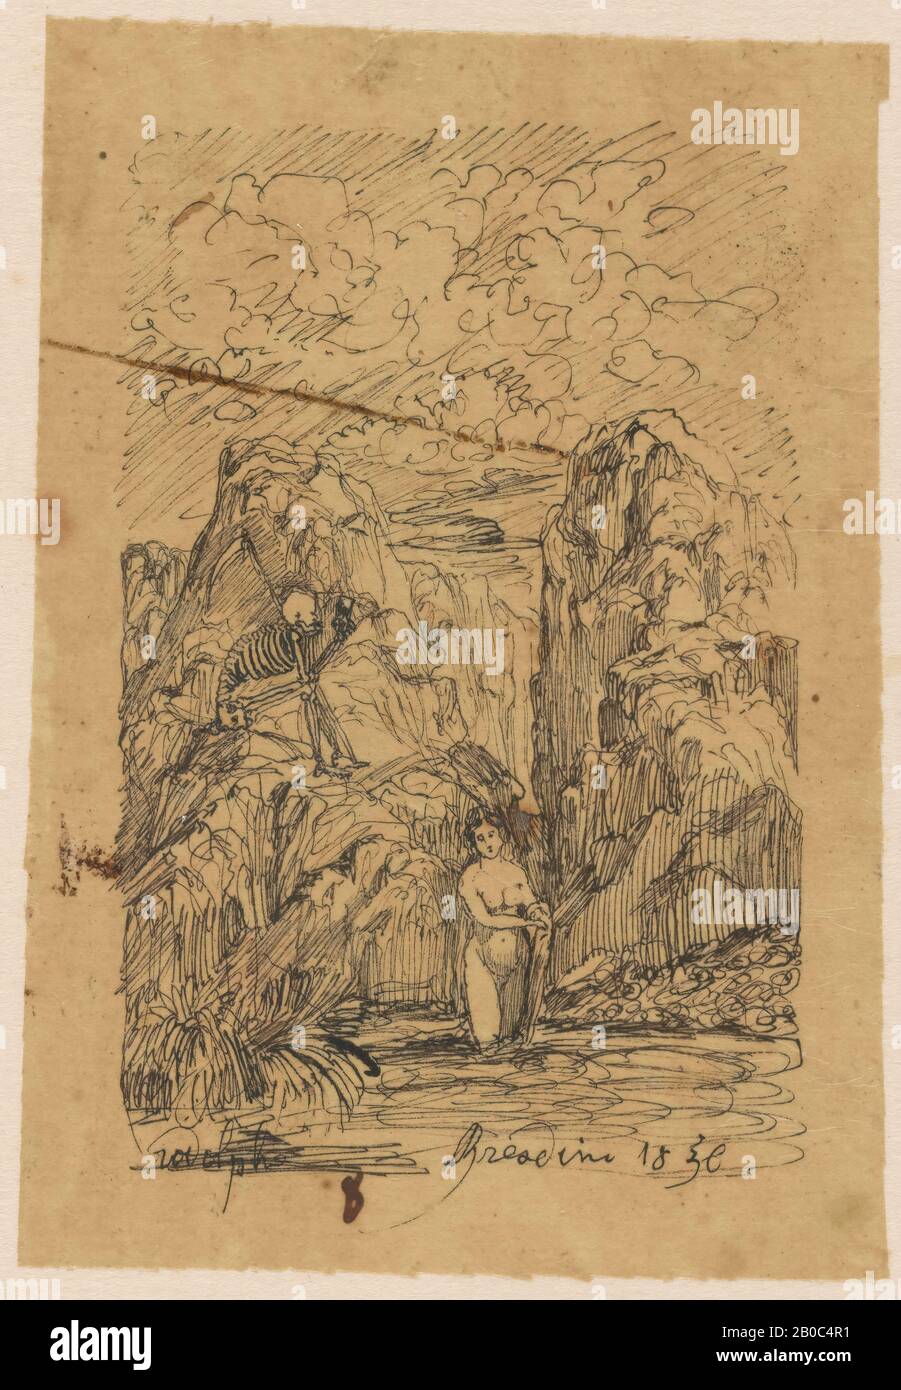 Rodolphe Bresdin, The Bather and Time, 1856, pen and black ink on tan tracing paper, mounted on cream wove paper, 4 in. x 2 13/16 in. (10.2 cm x 7.1 cm), Rodolphe Bresdin, one of the most visionary and eccentric graphic artists of the nineteenth century, was admired by the likes of Victor Hugo and Charles Baudelaire. This pairing of a preparatory drawing from 1856 and the related lithograph, published in Toulouse the following year, reveals the artist's process. The drawing is a quick, energetic working study. It depicts a young woman bathing in a pond as Death observes time running out. Sever Stock Photo